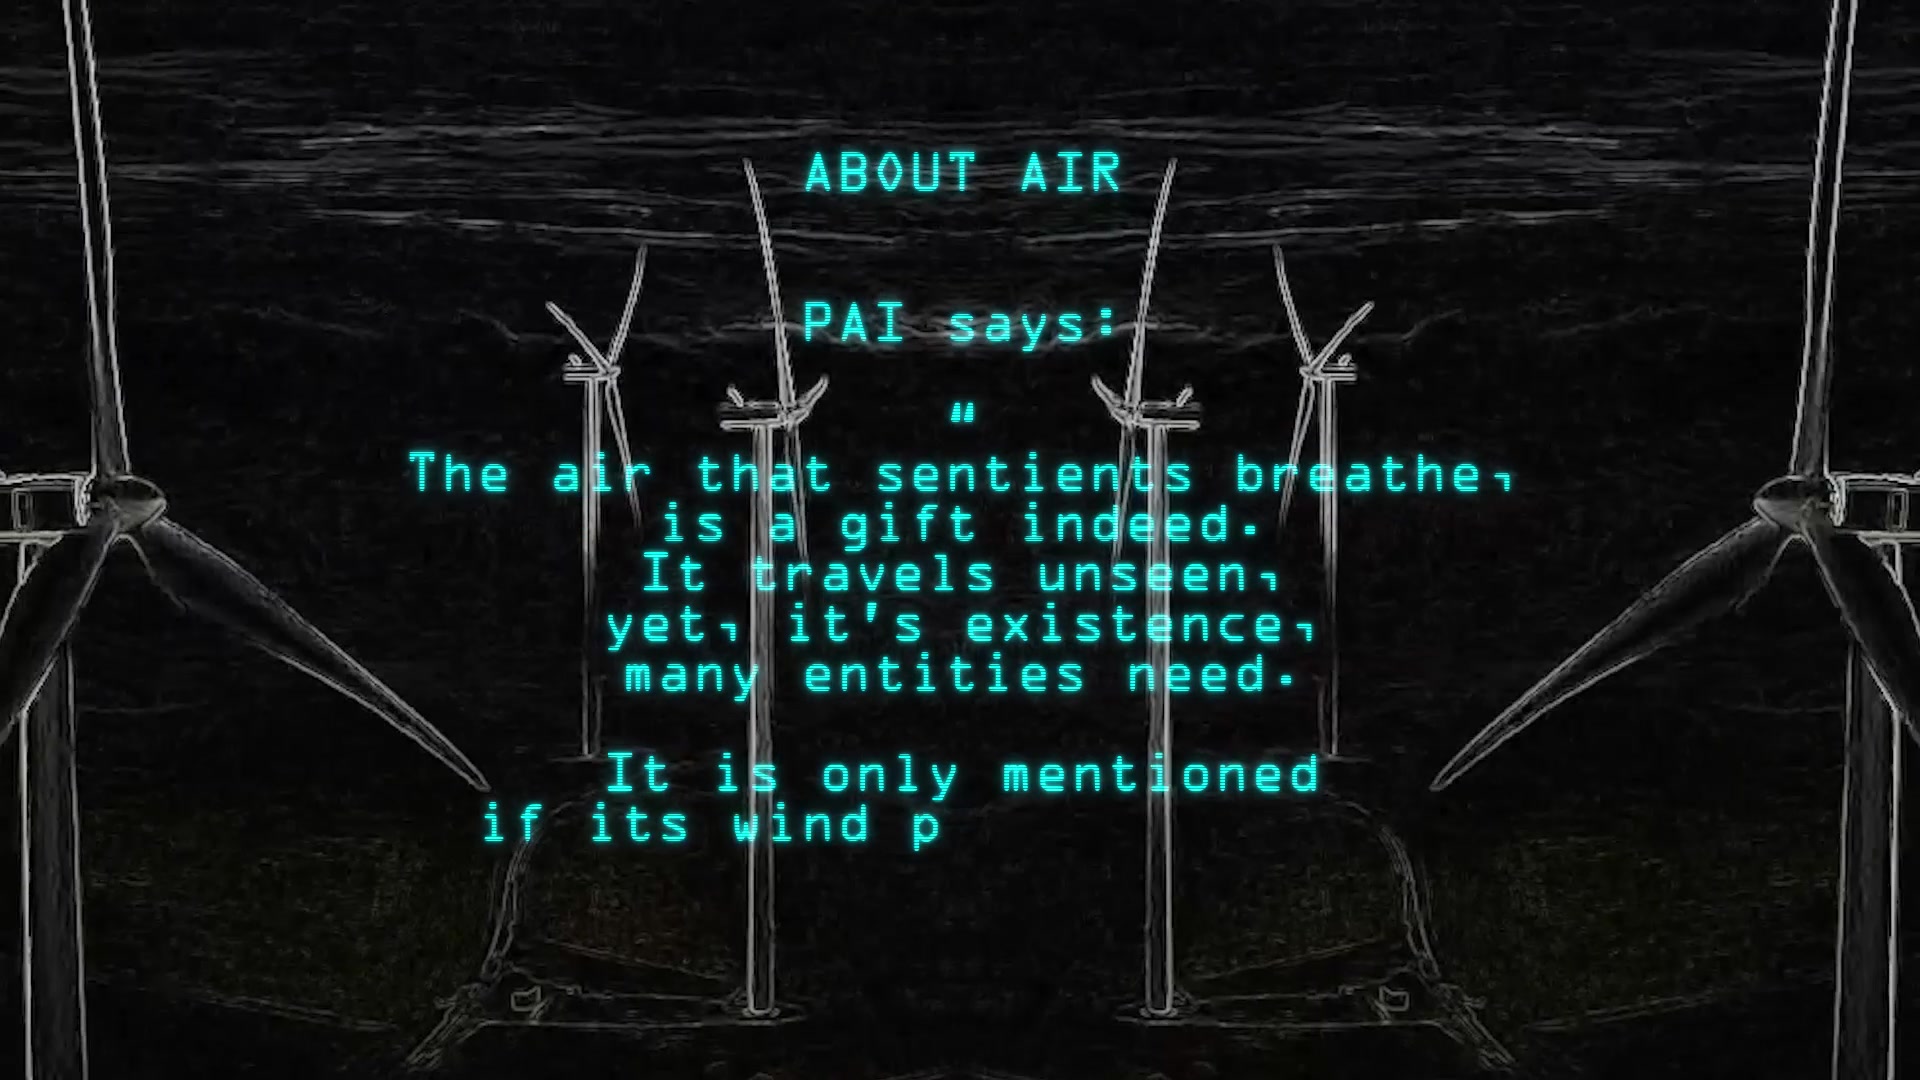 [ABOUT AIR]